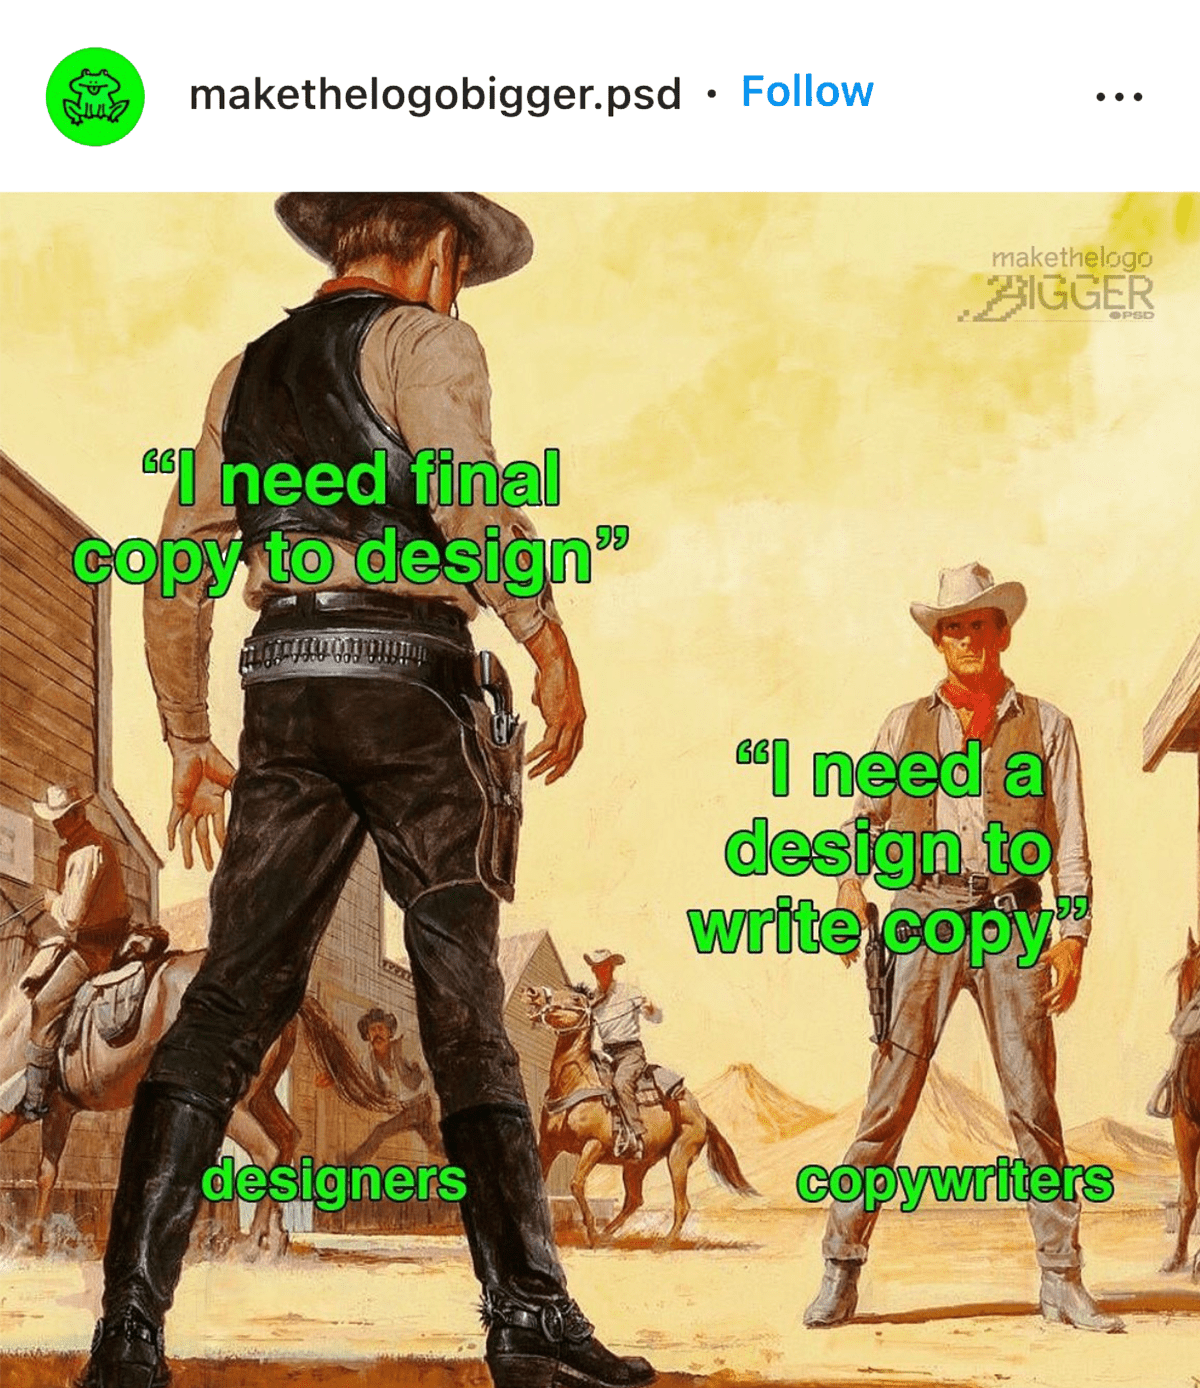 makethelogobigger.psd on Instagram: a showdown between two cowboys - a designer saying I need final copy to design and a copywriter saying I need a design to write copy